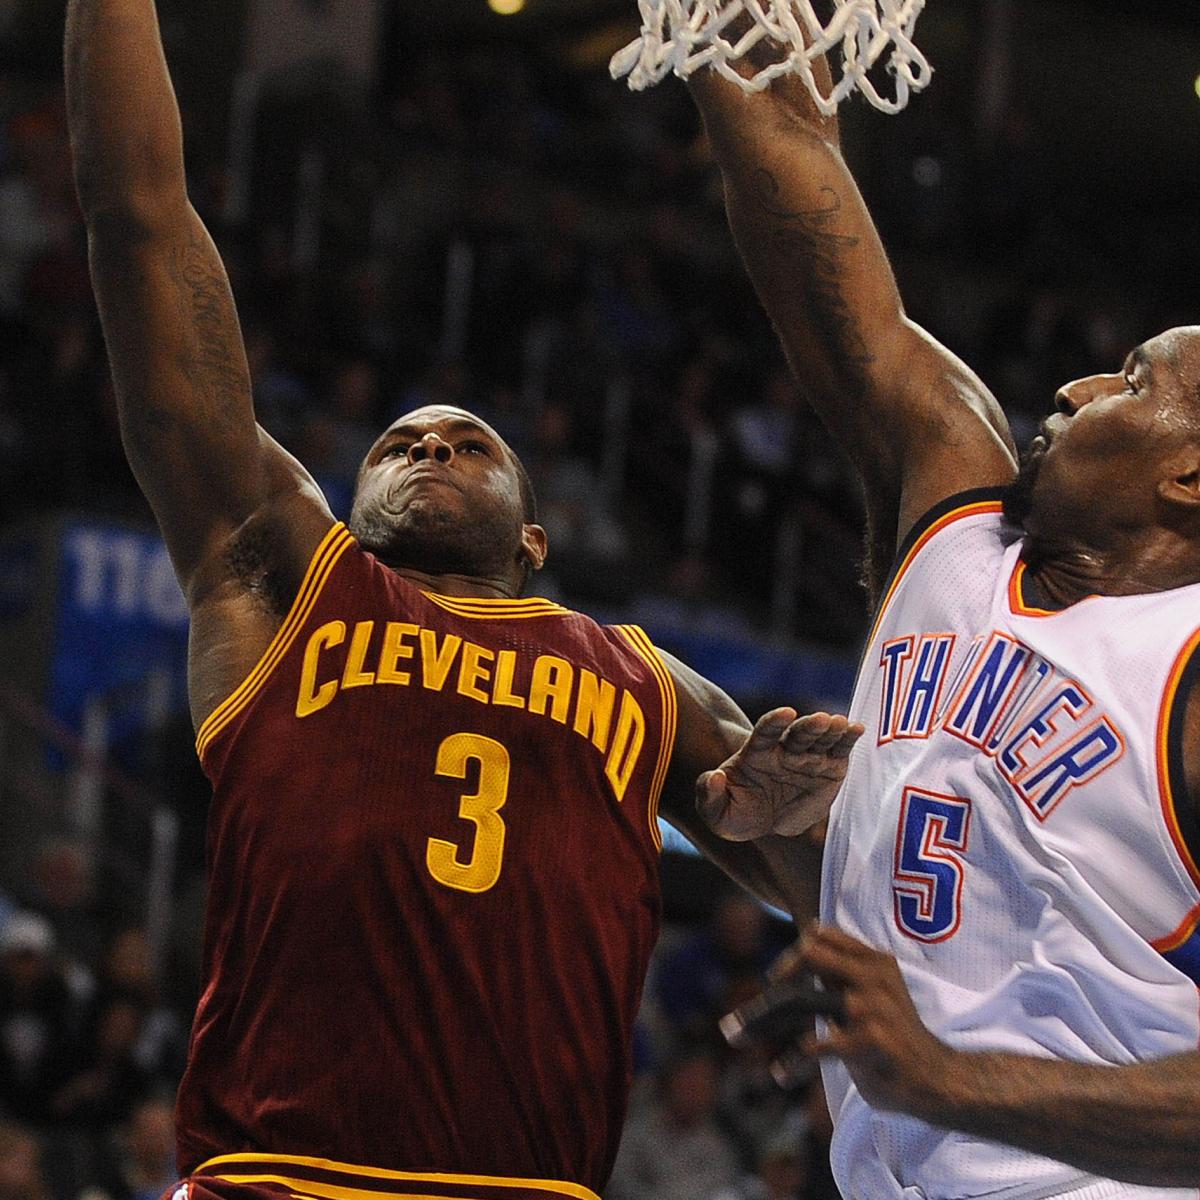 Watch Dion Waiters' Nasty Dunk vs. the Thunder in the 4th Quarter | Bleacher Report ...1200 x 1200